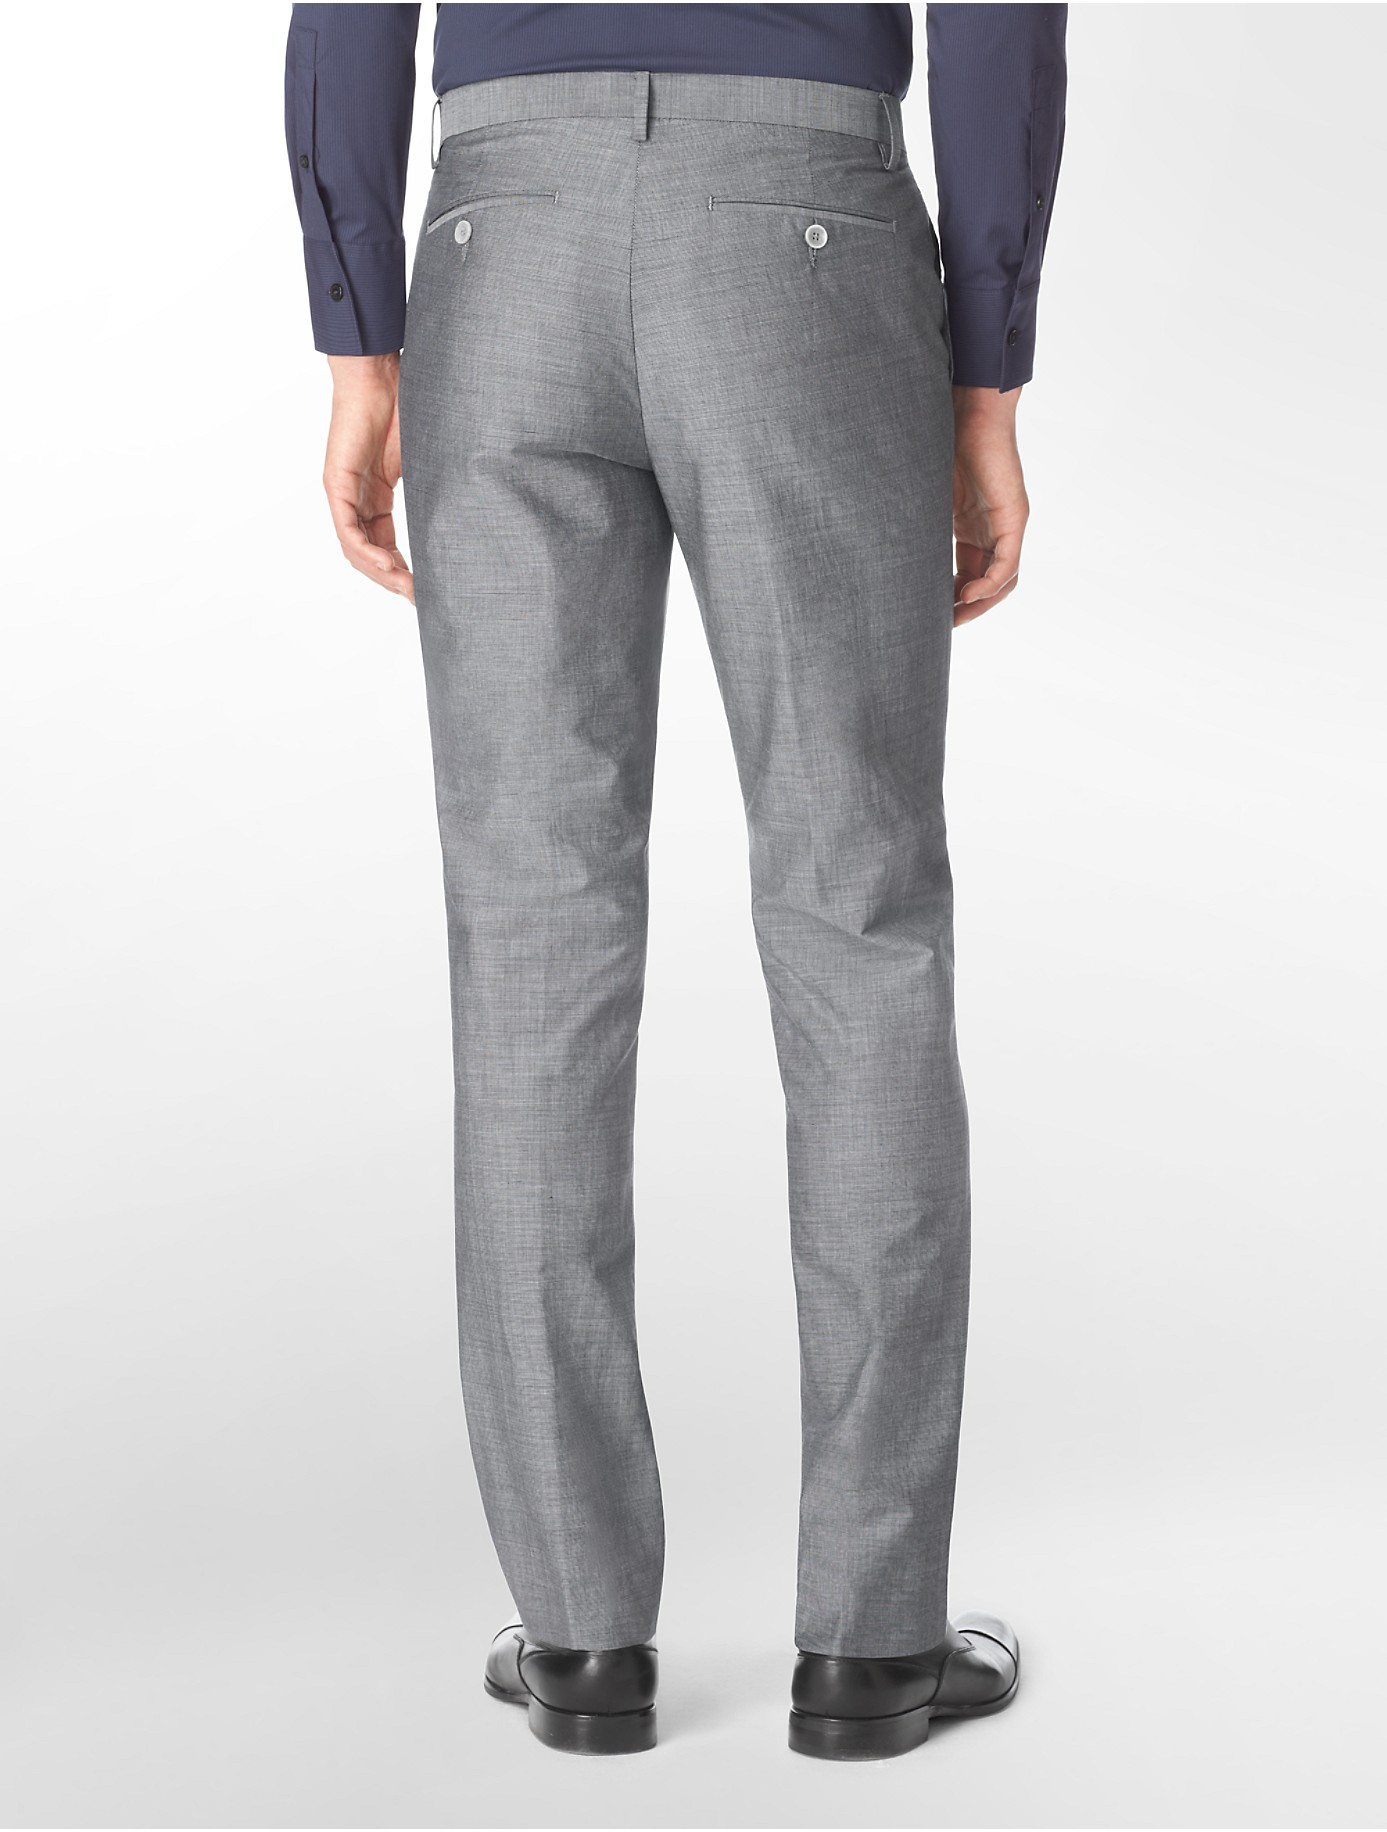 Calvin klein White Label Straight Fit Pinstripe Dress Pants in Gray for ...